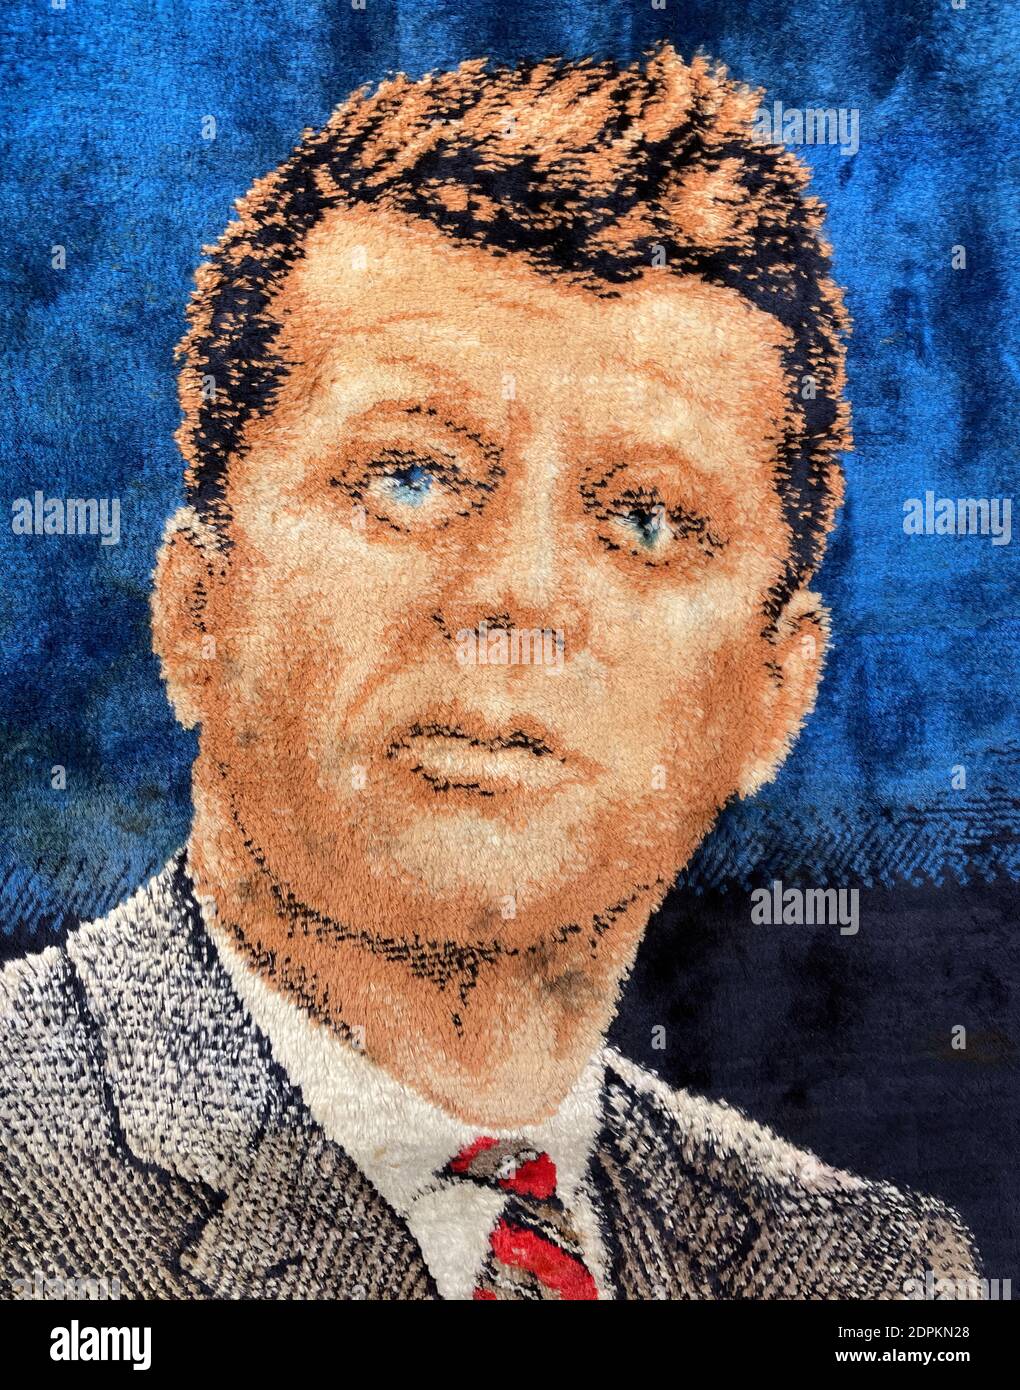 A portrait of John F Kennedy the 35th President of the United States from a woven blanket. Stock Photo